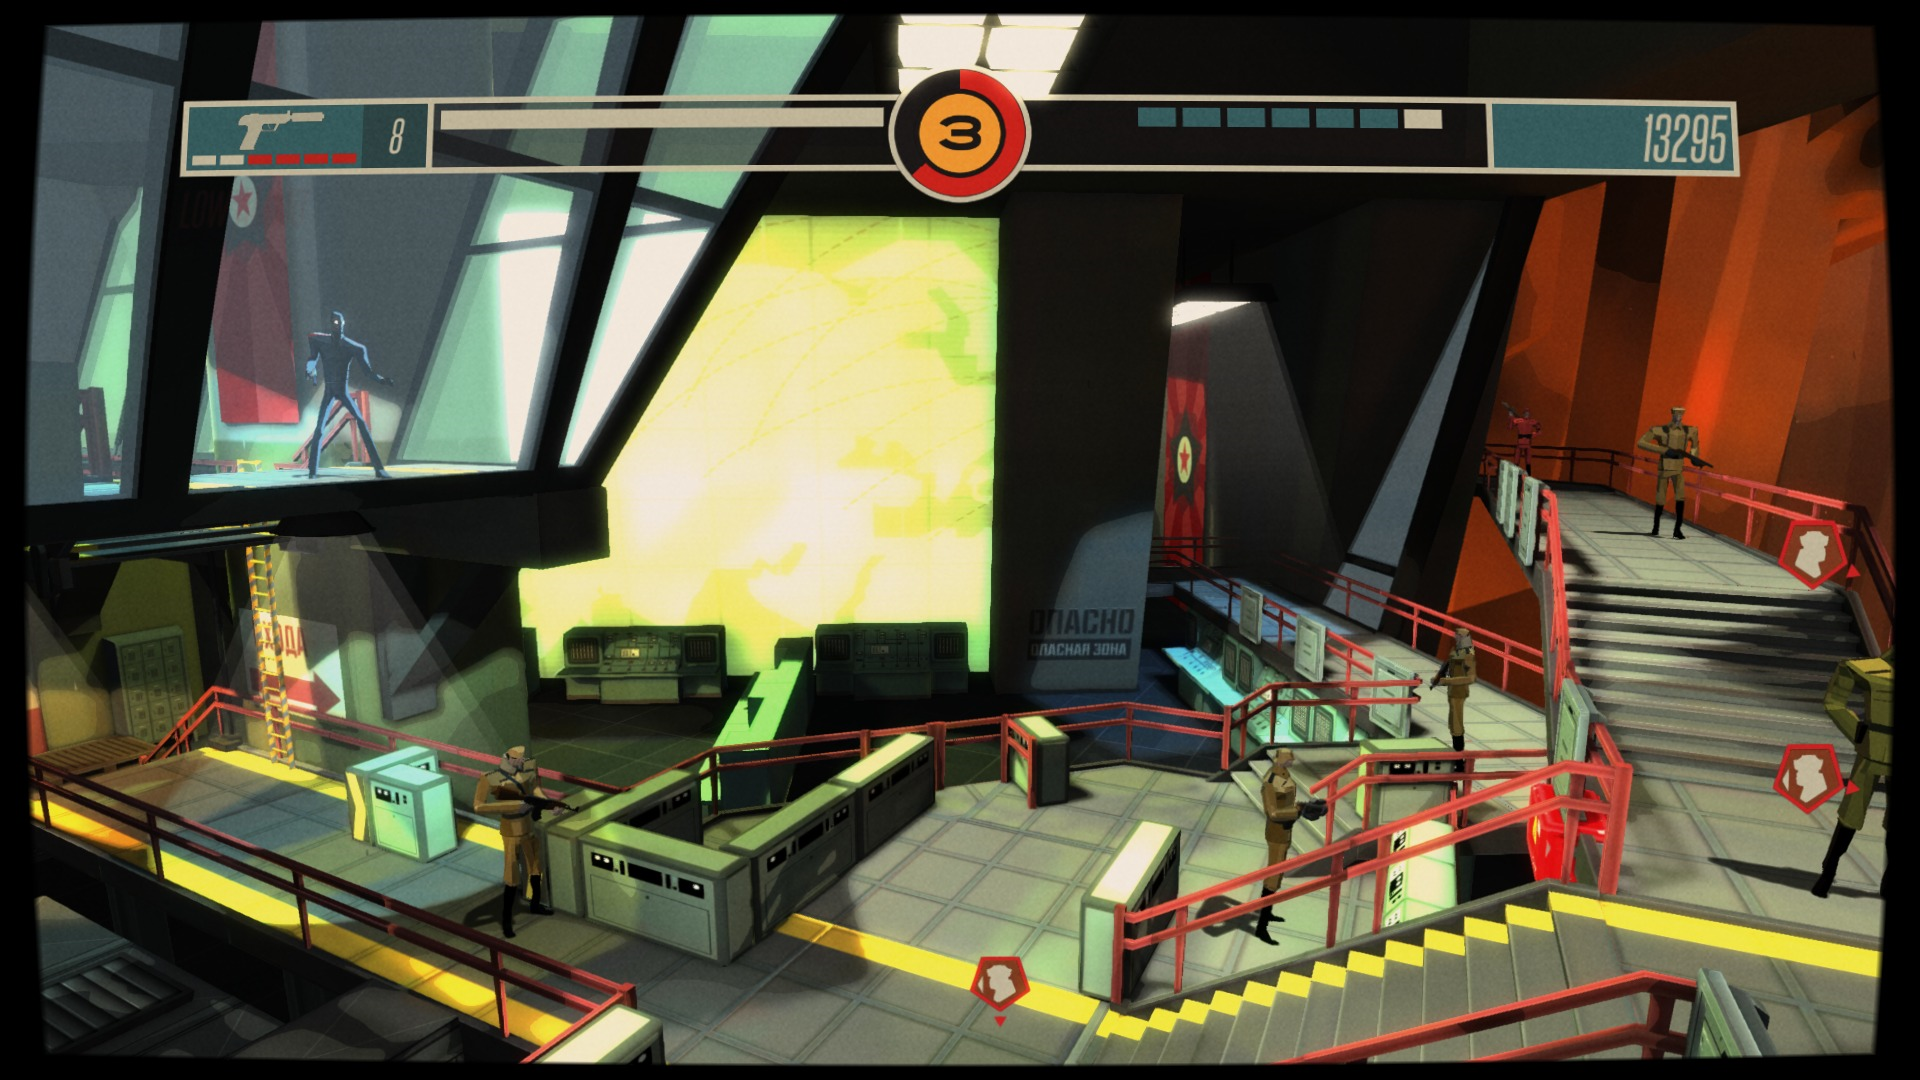 CounterSpy